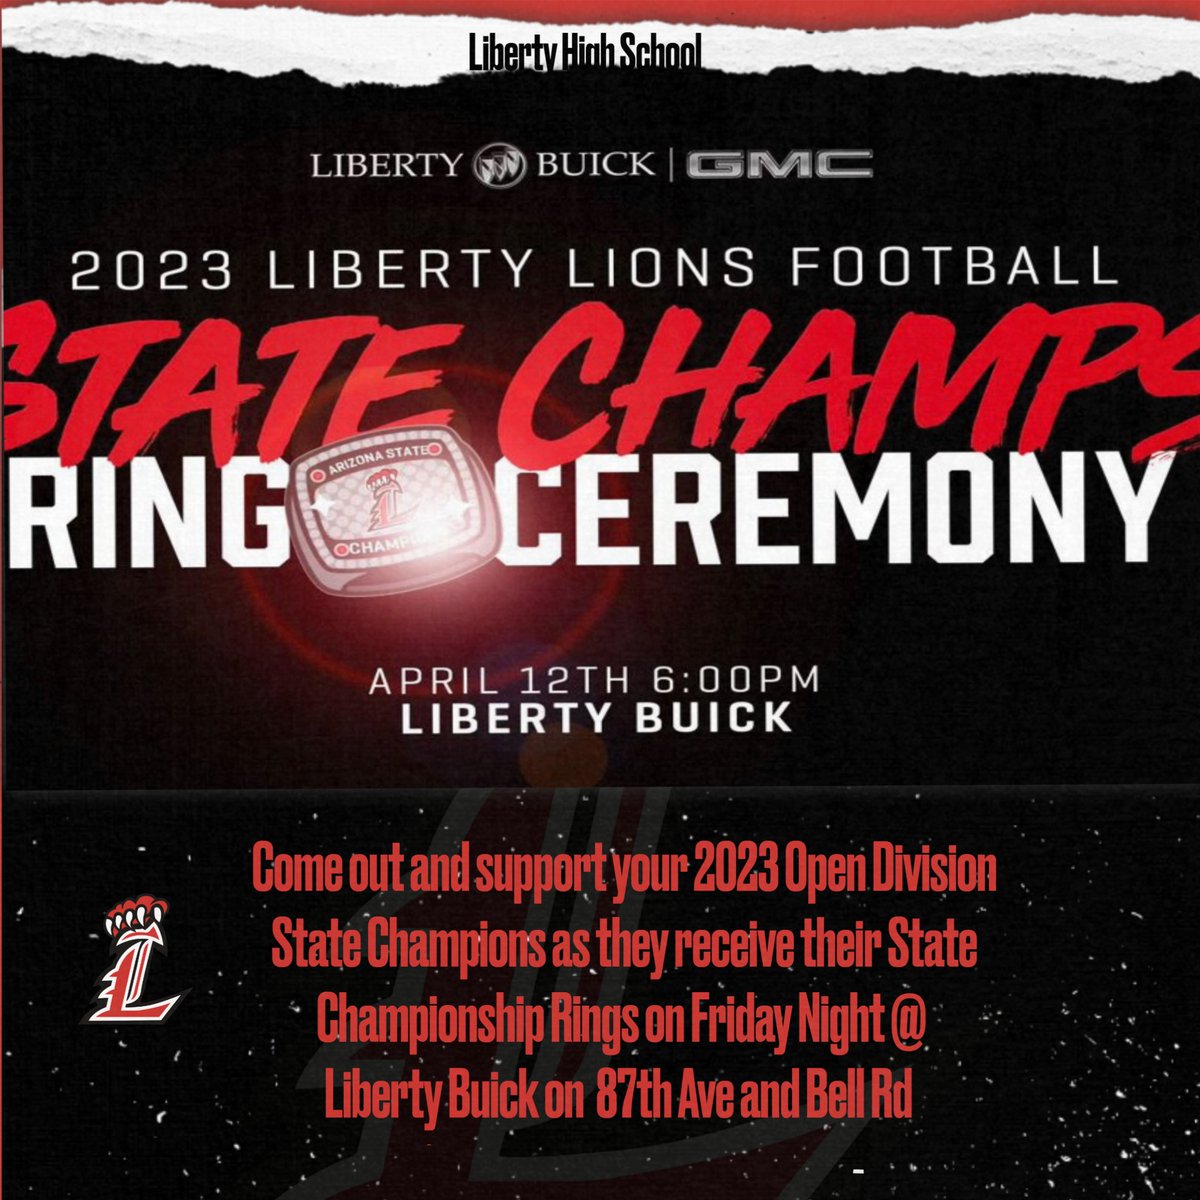 Come out and support your @LibertyFBLions as they receive their State Championship Rings on Friday night at Liberty Buick on 87th Ave and Bell Red. The ceremony will begin promptly at 6:00 PM and will also include 3 state champs in golf, CC and Dive. #libertybuick #libertygmcaz